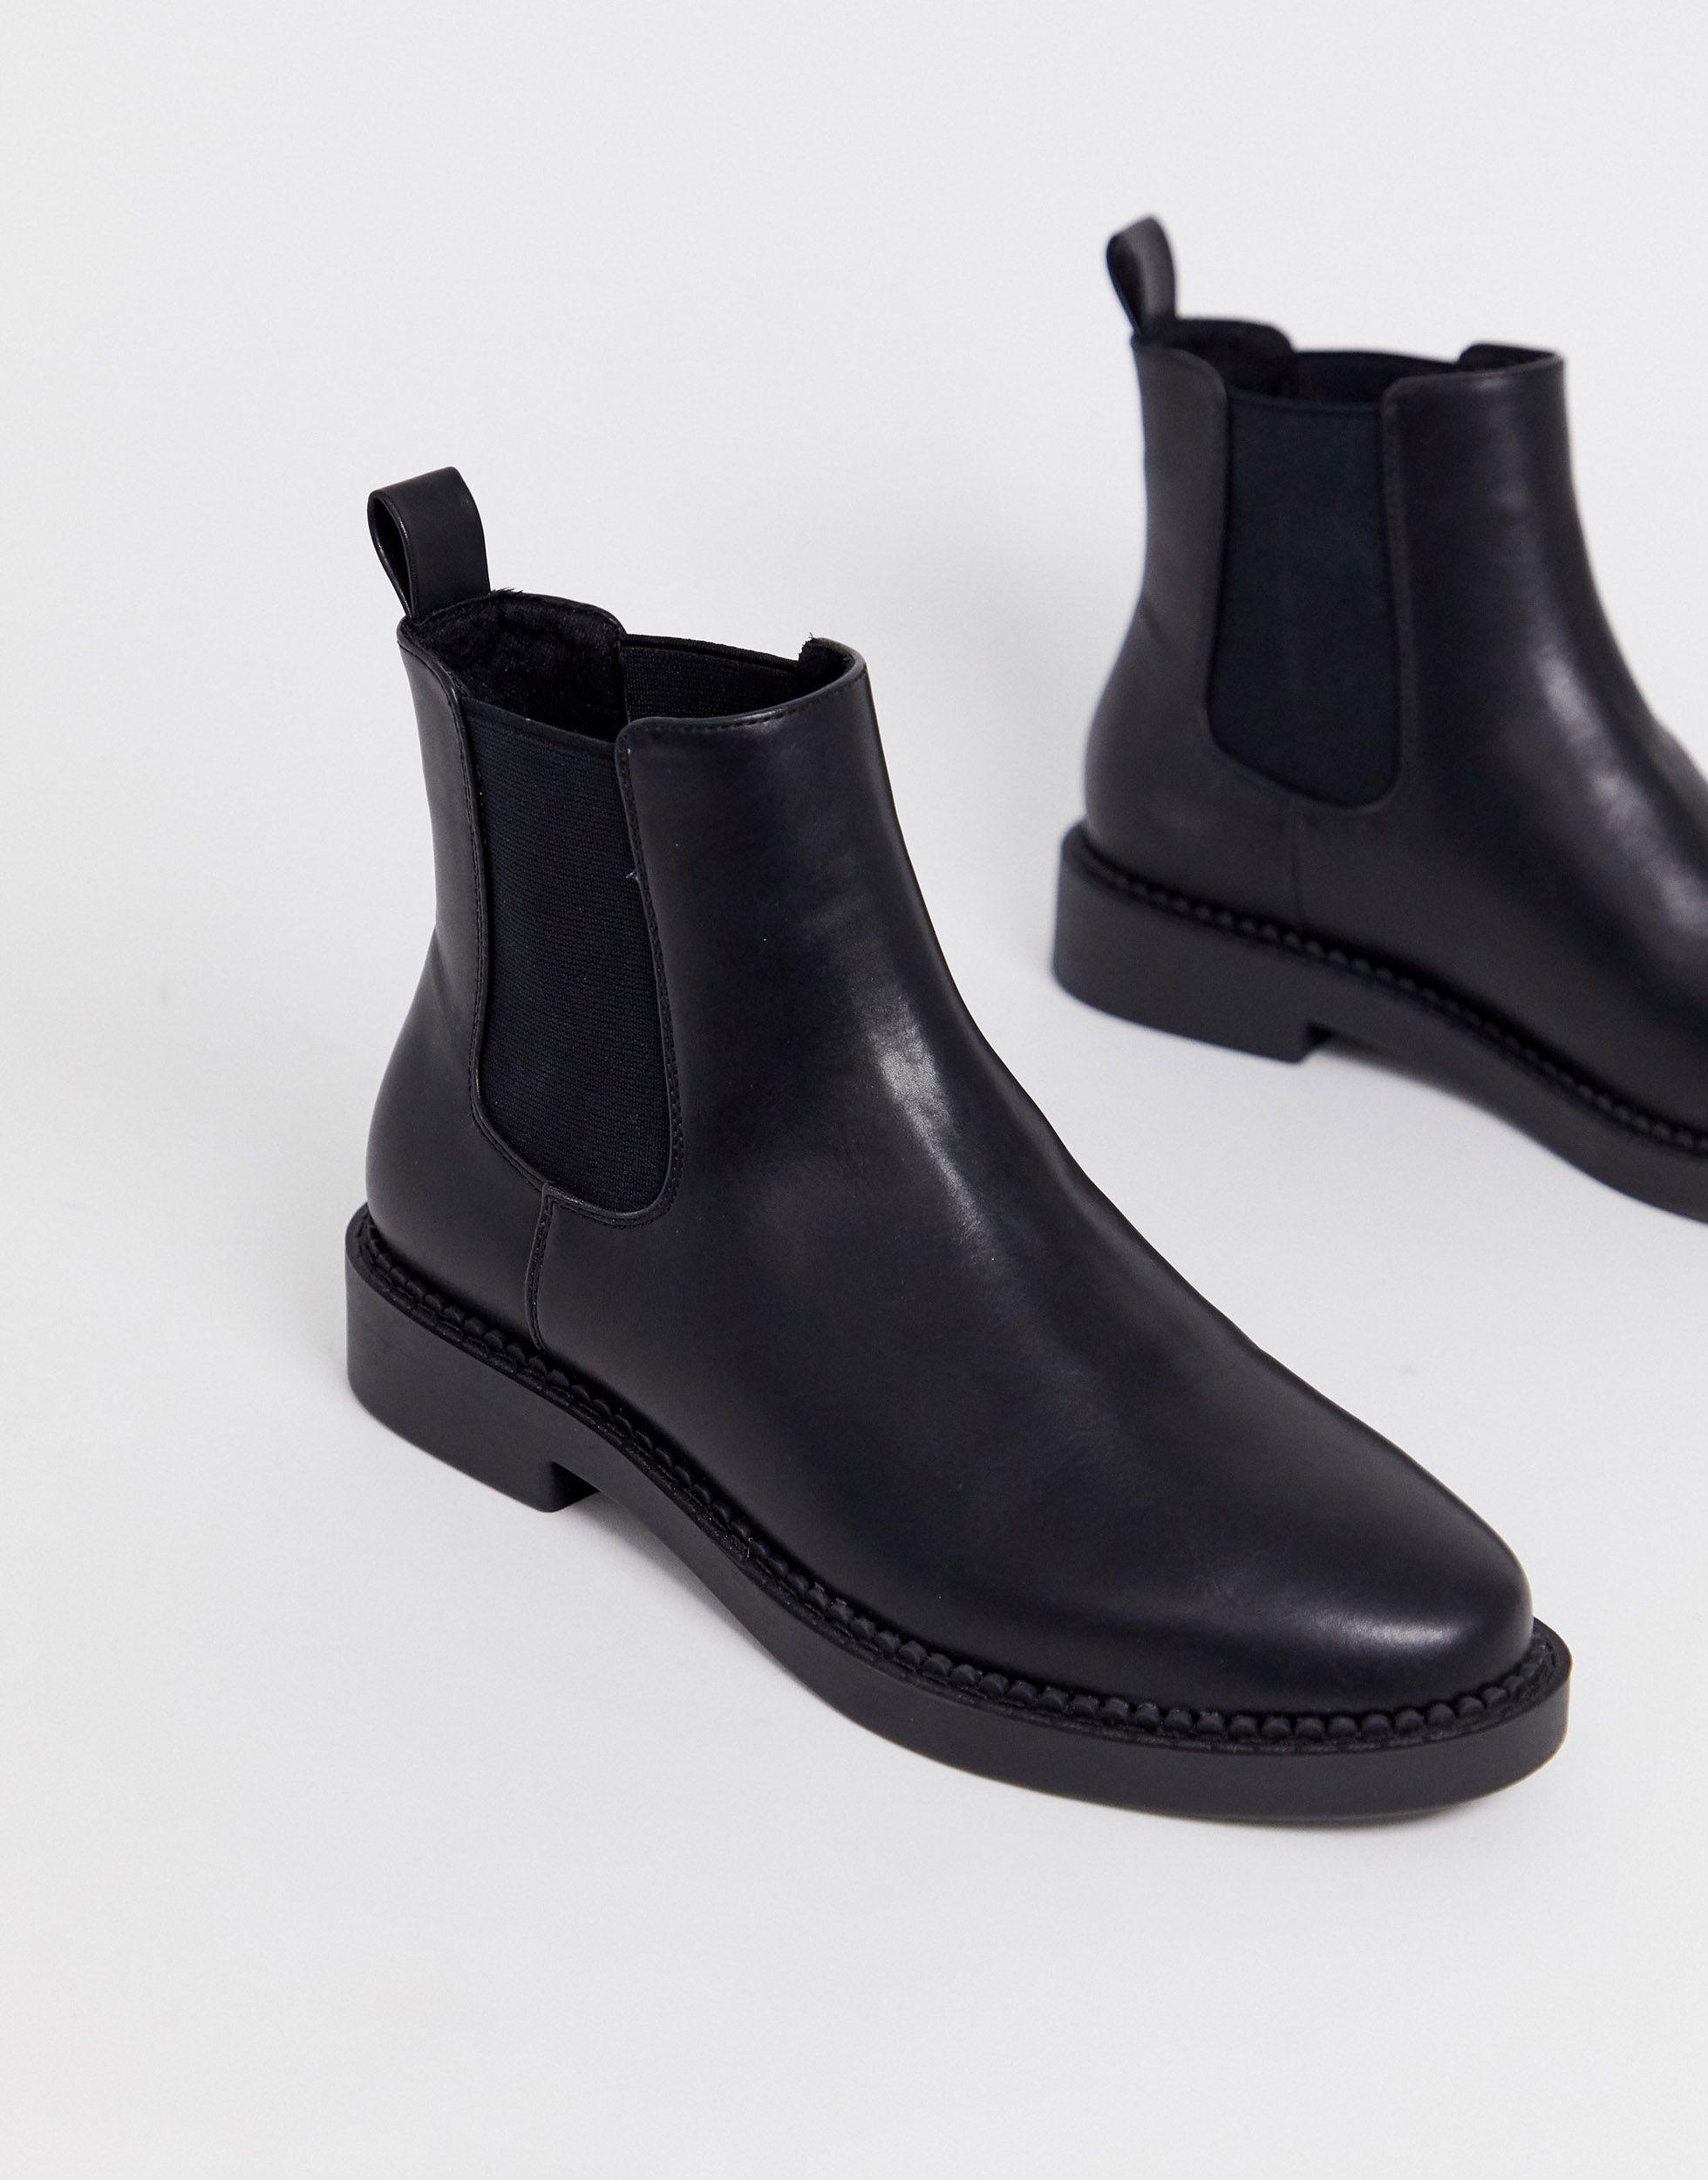 ASOS Leather Auto Chunky Chelsea Boots in Black - Lyst